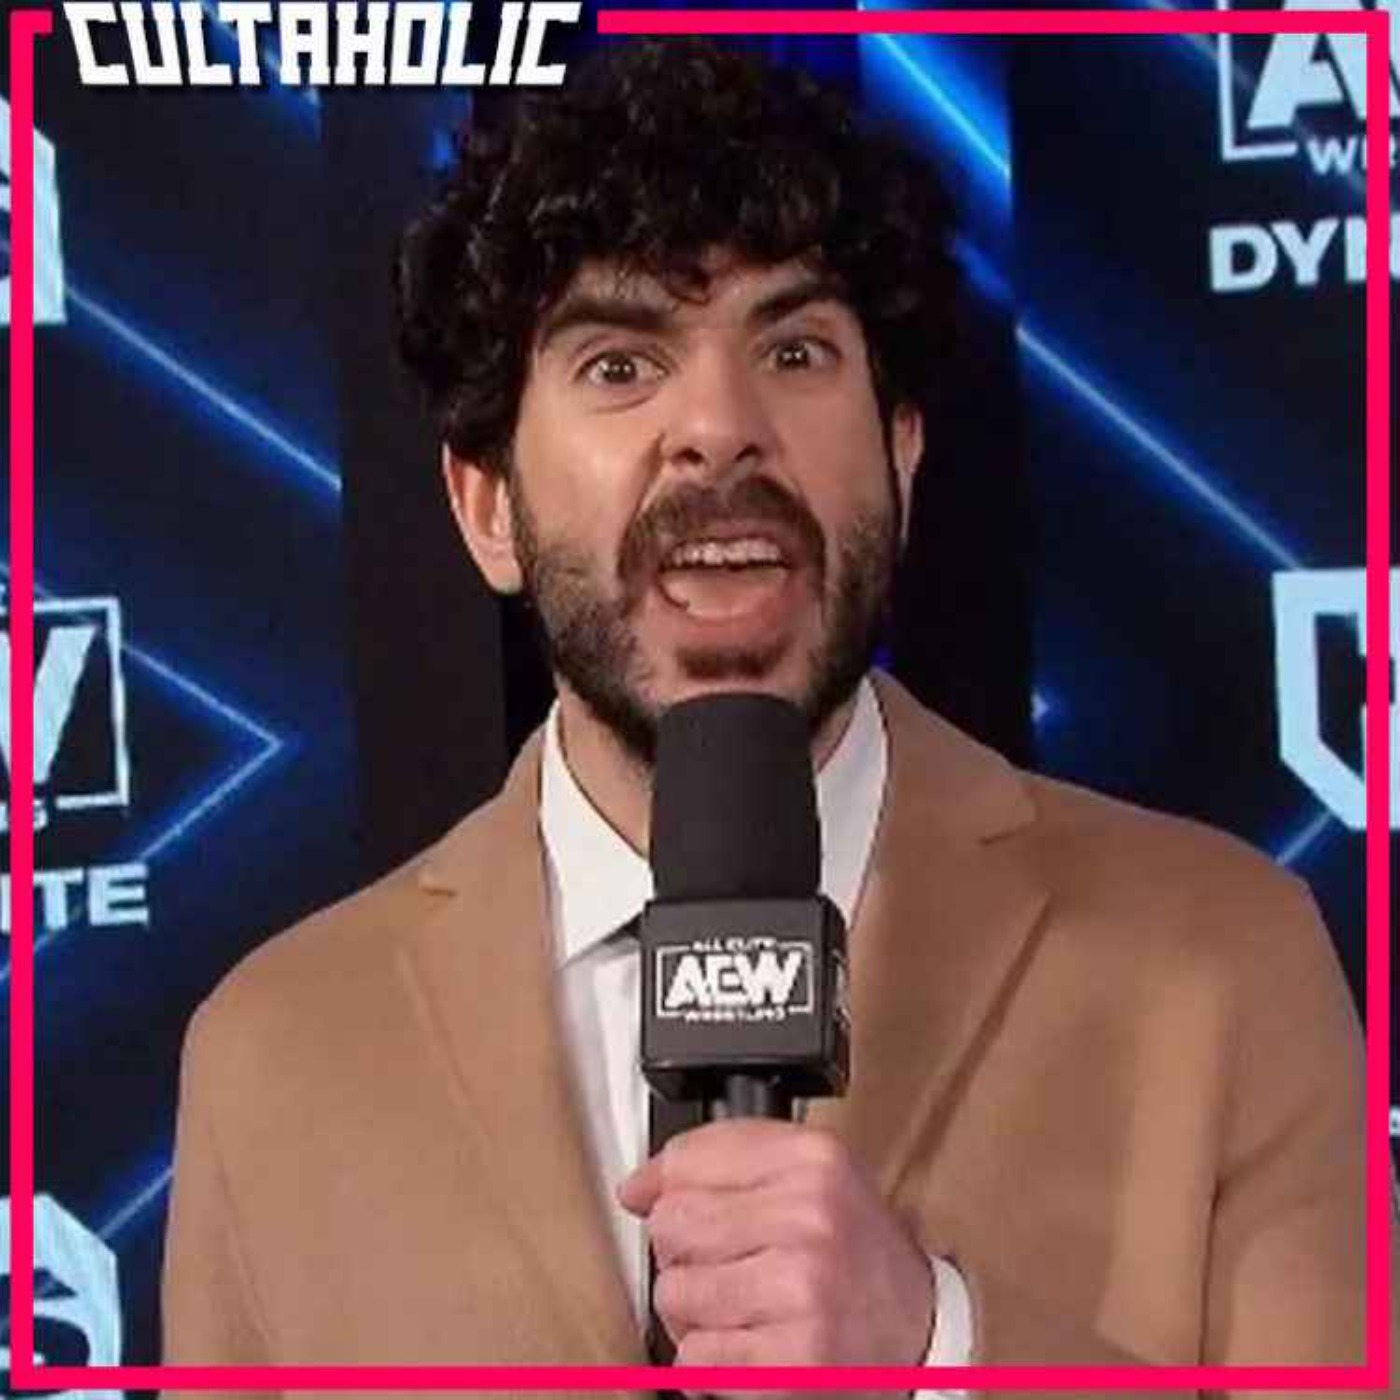 News - Tony Khan RAGES at “Double Standard” Wrestling Fans, Slams WWE Creative - SHOCK NXT Title Change - Matt Riddle Claims Brock Lesnar FORCED Royal Rumble Win